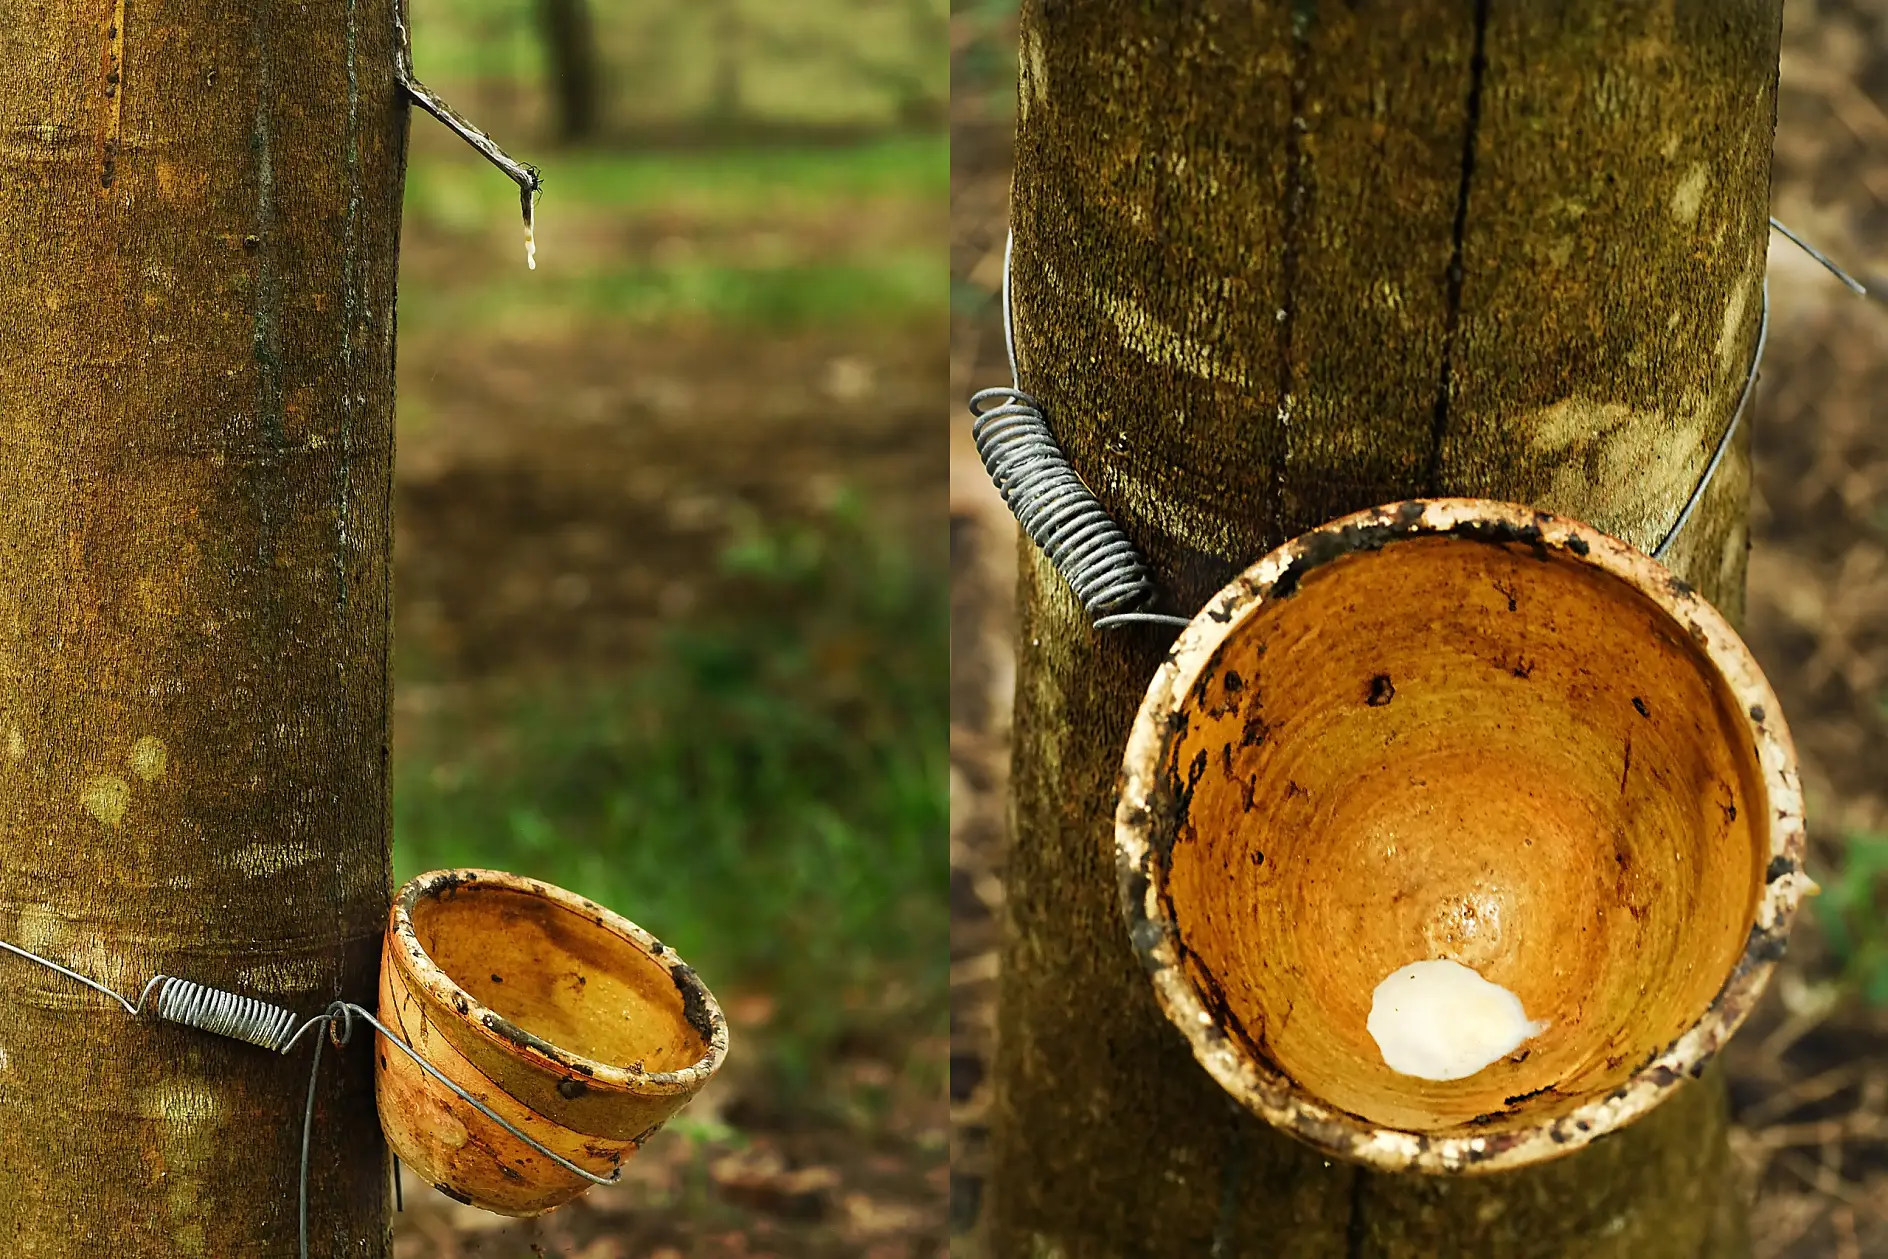 Latex milk is directly gained from the rubber tree